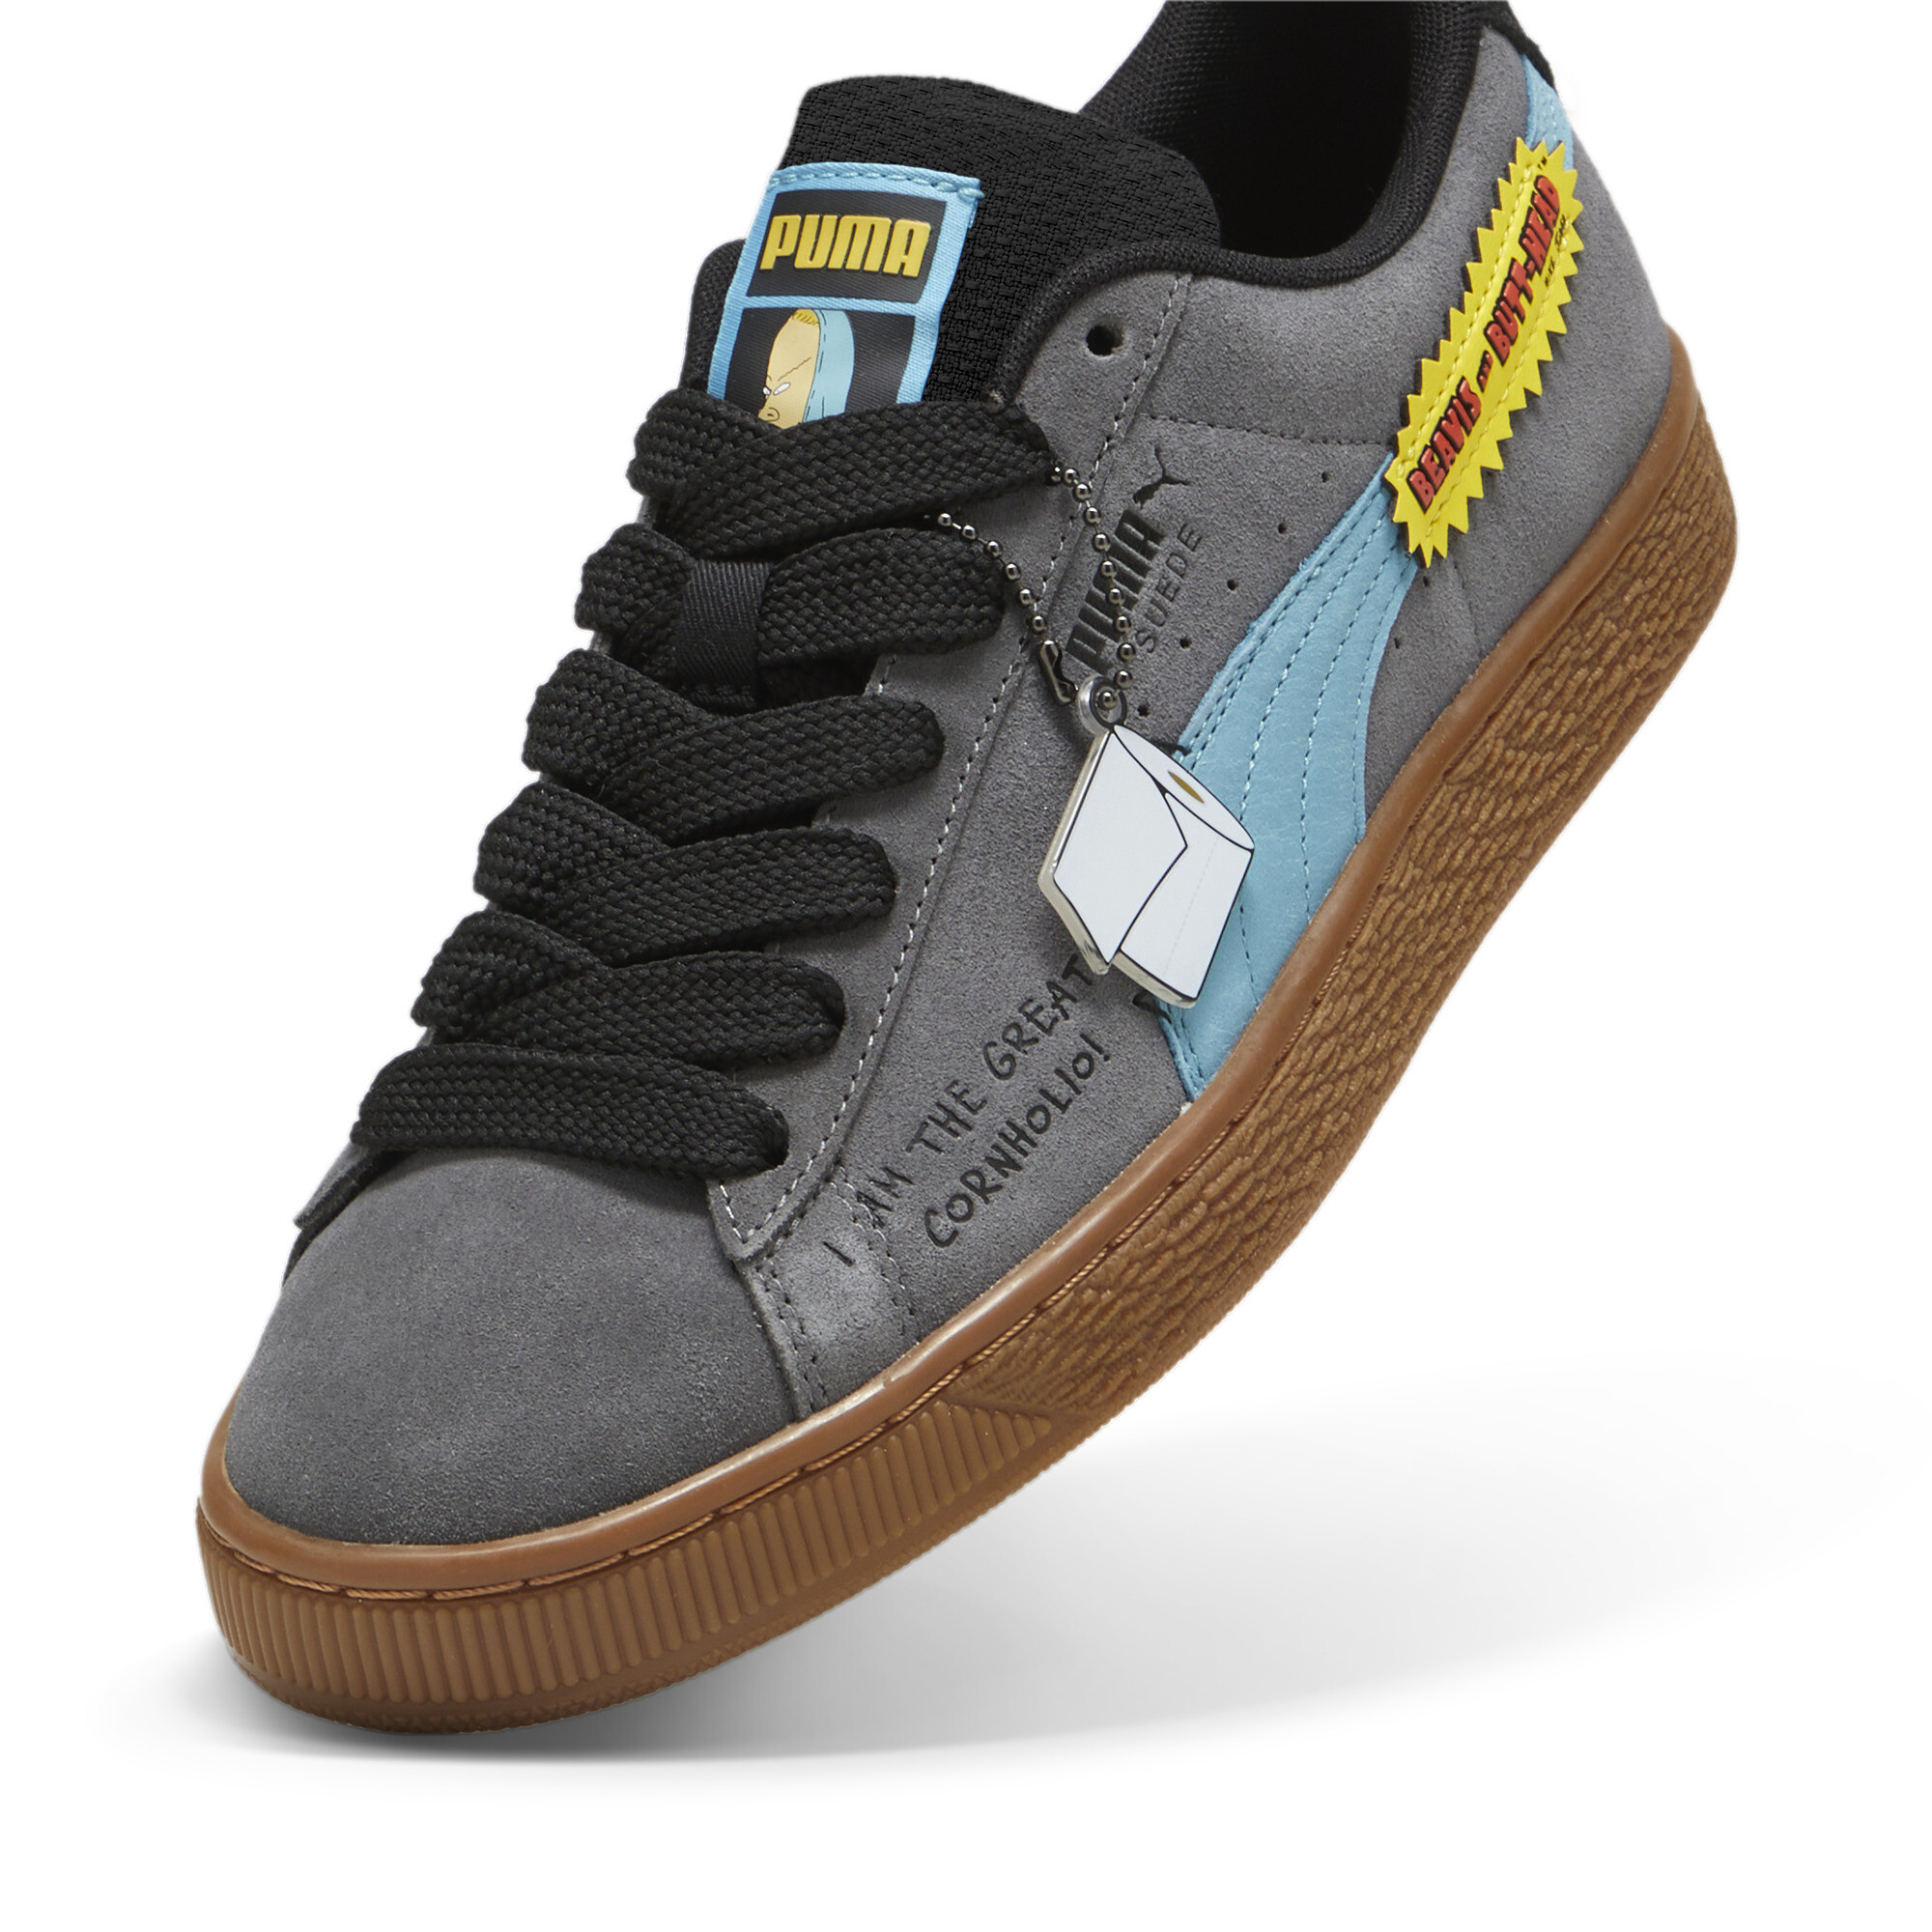 Kids' PUMA X BEAVIS AND BUTTHEAD Suede Sneakers In Gray, Size EU 37.5